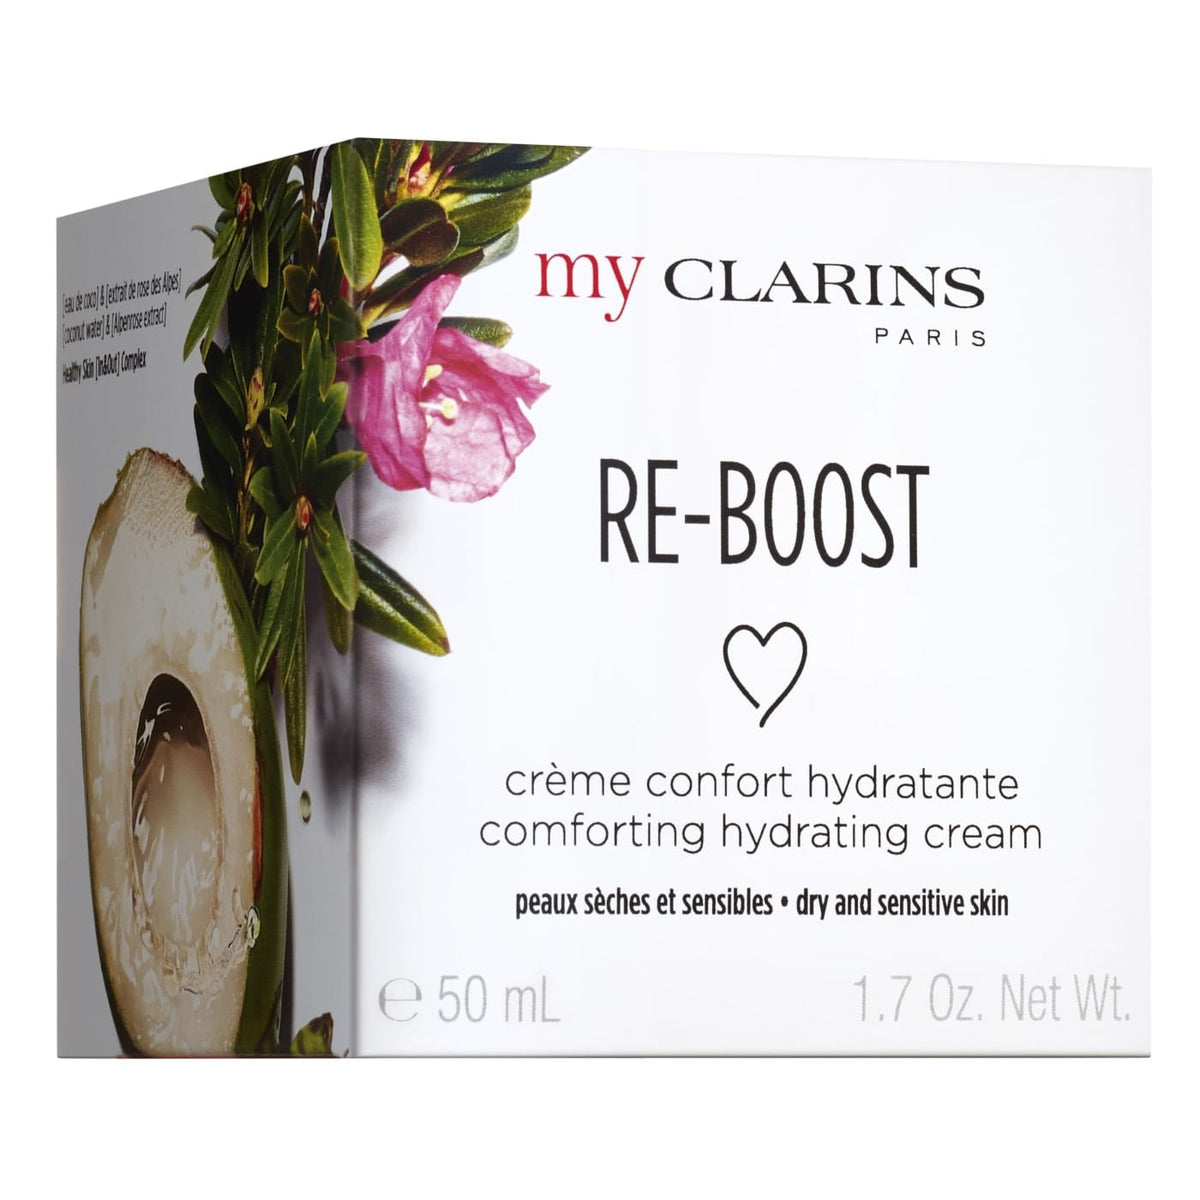 My Clarins Re-Boost Comforting Hydrating Cream